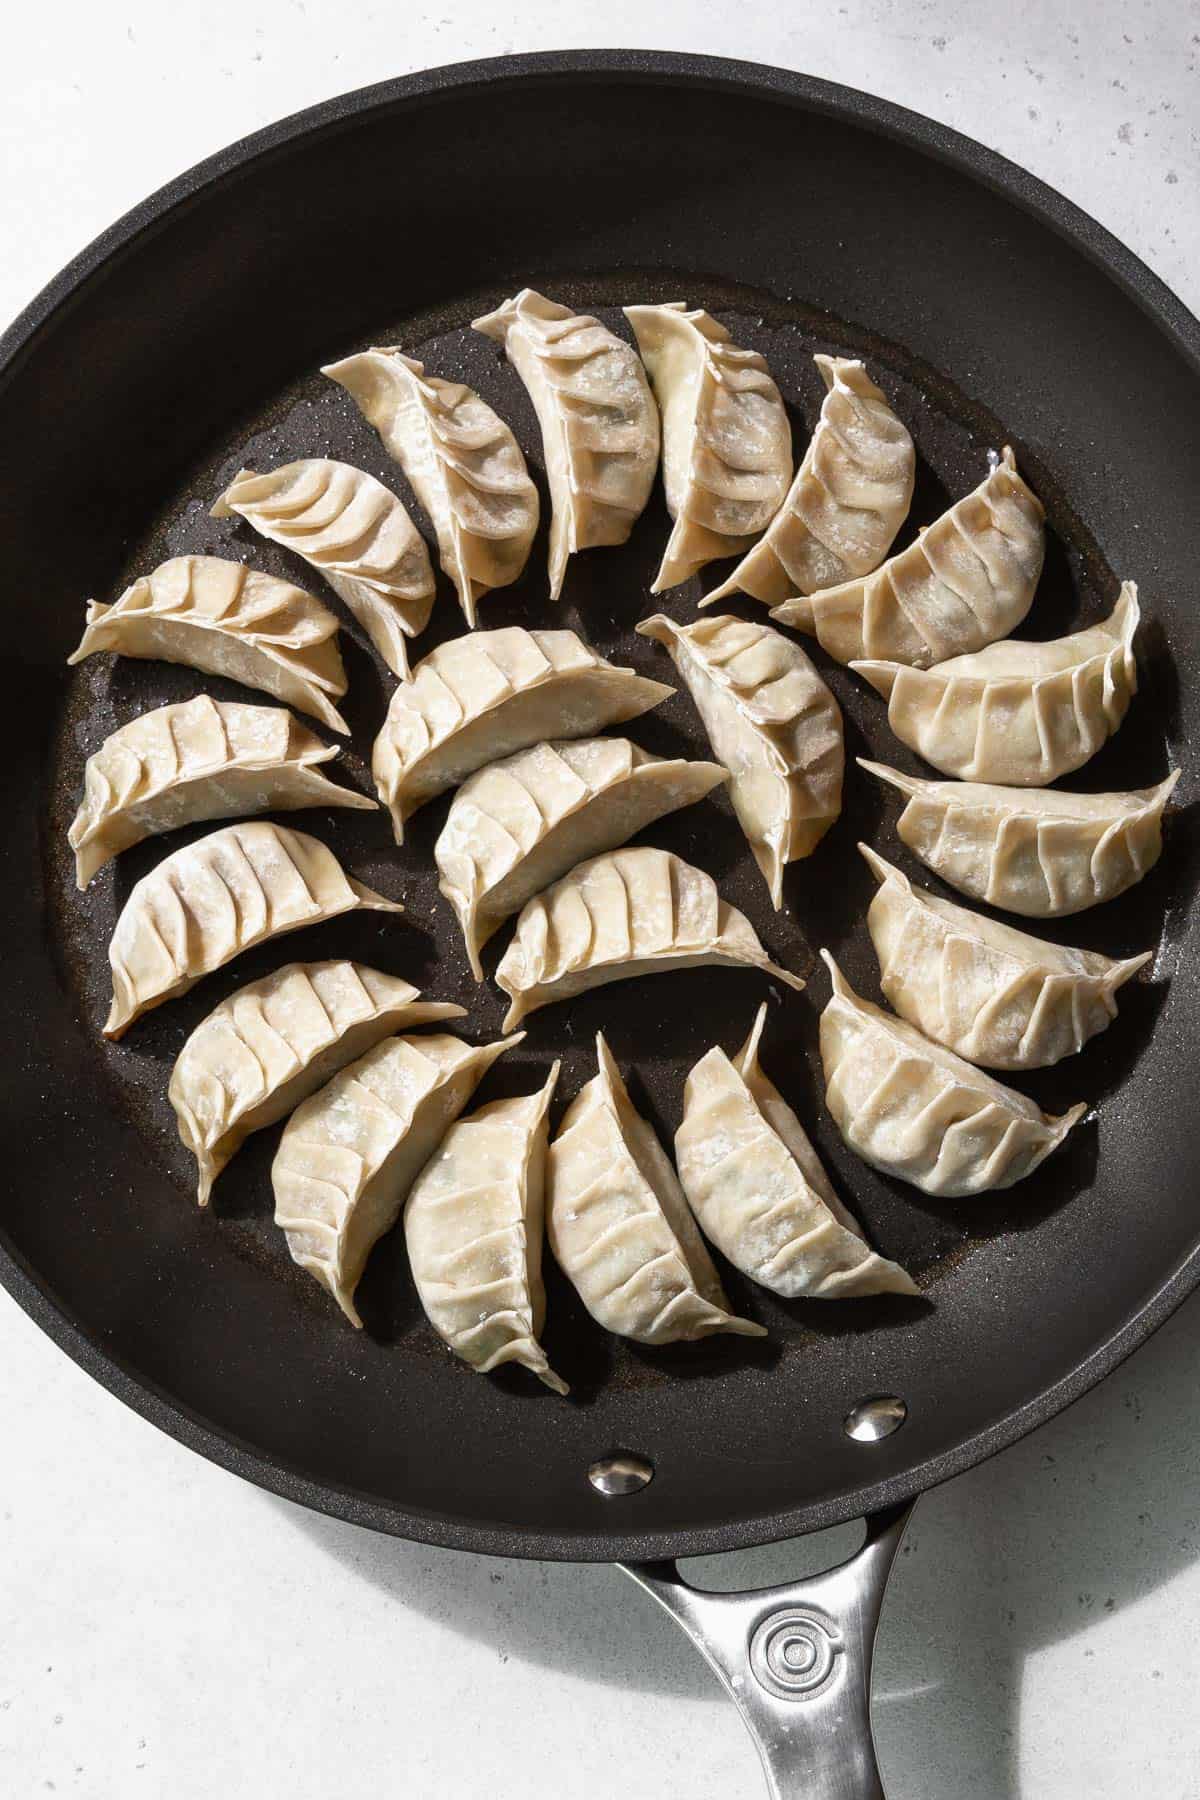 Uncooked gyoza lined on a greased nonstick frying pan.